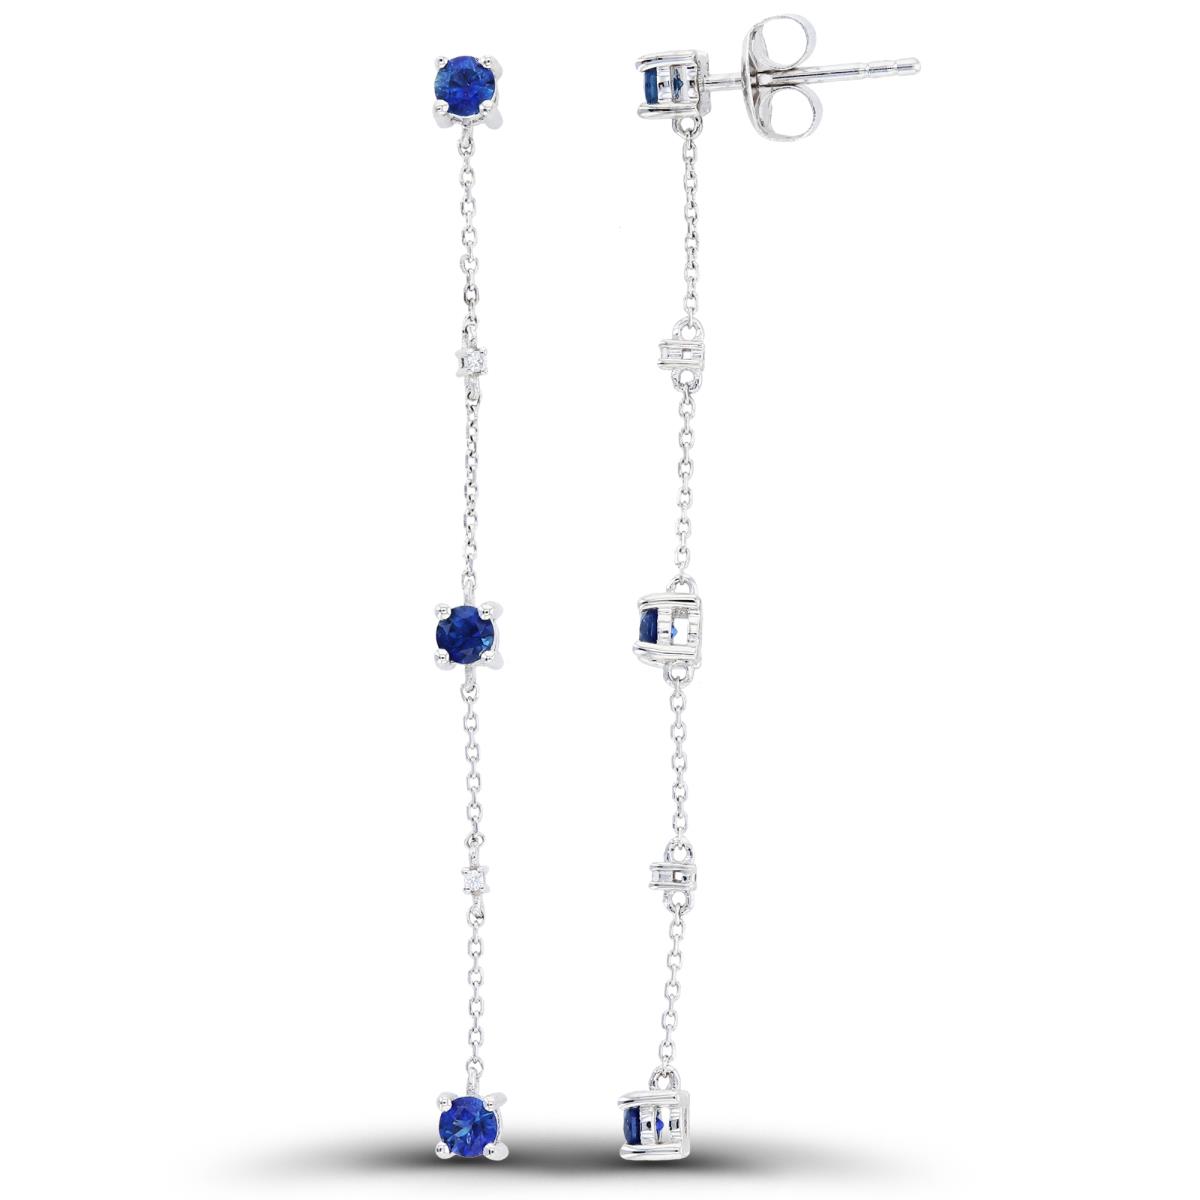 10K White Gold & Cr. Blue and White Sapphire Station Drop Earring